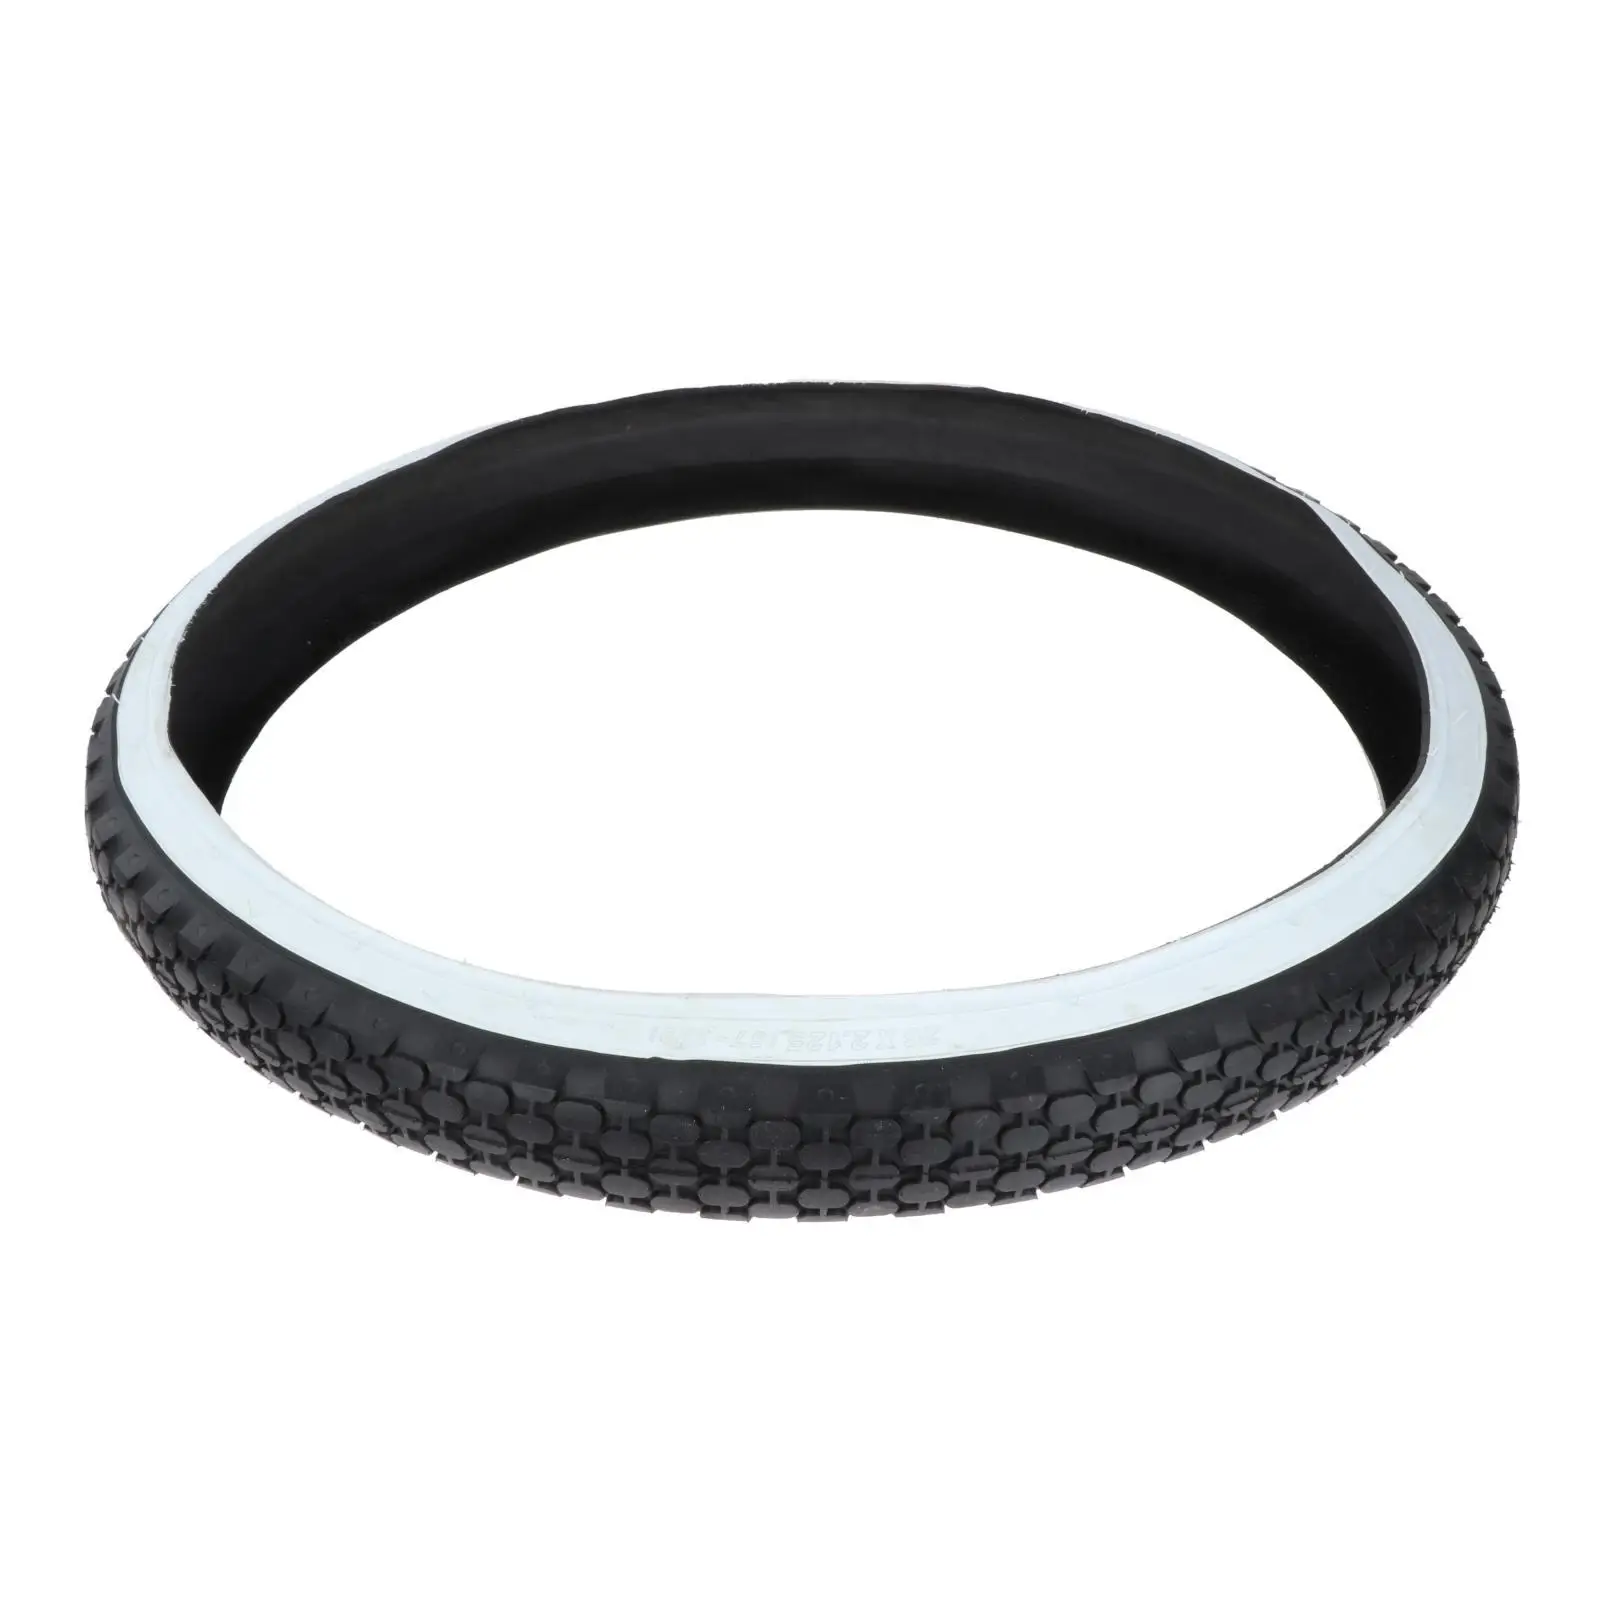 Road Bicycle Tyre 26x2.125 Durable More Grip Replacement for Mountain Bike